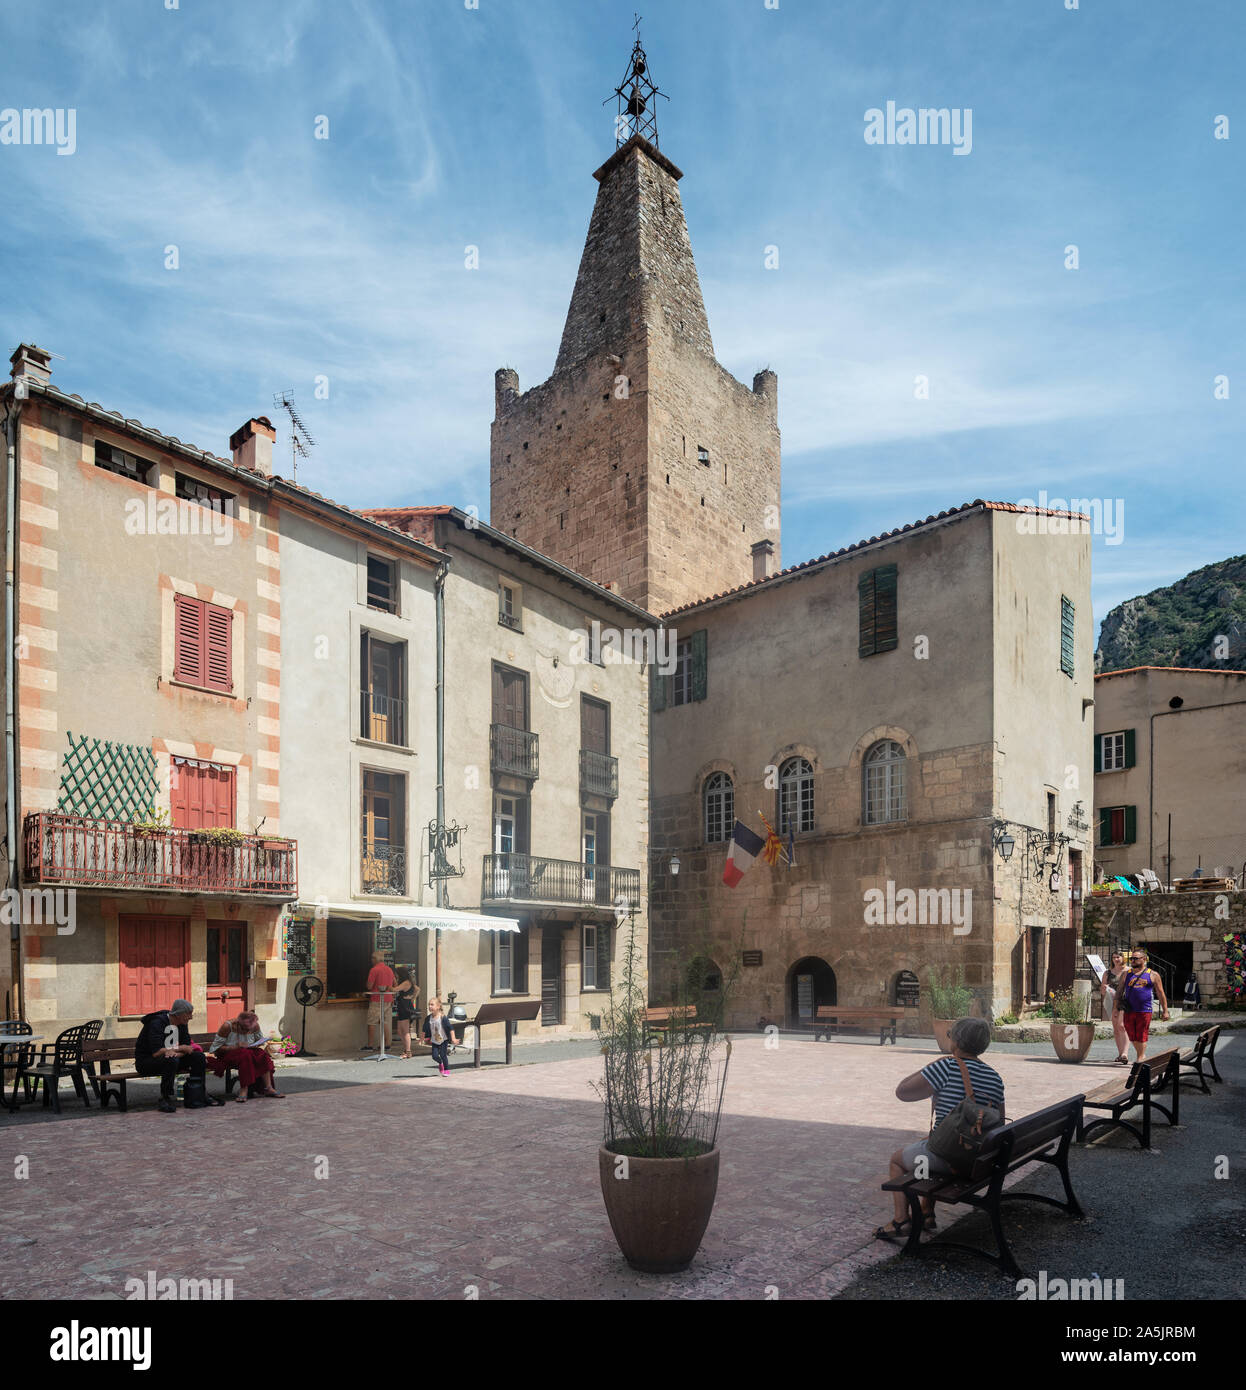 People walking in old streets of Villefranche-De-Conflent town, Pyrenees Orientales, French Catalonia, France Stock Photo